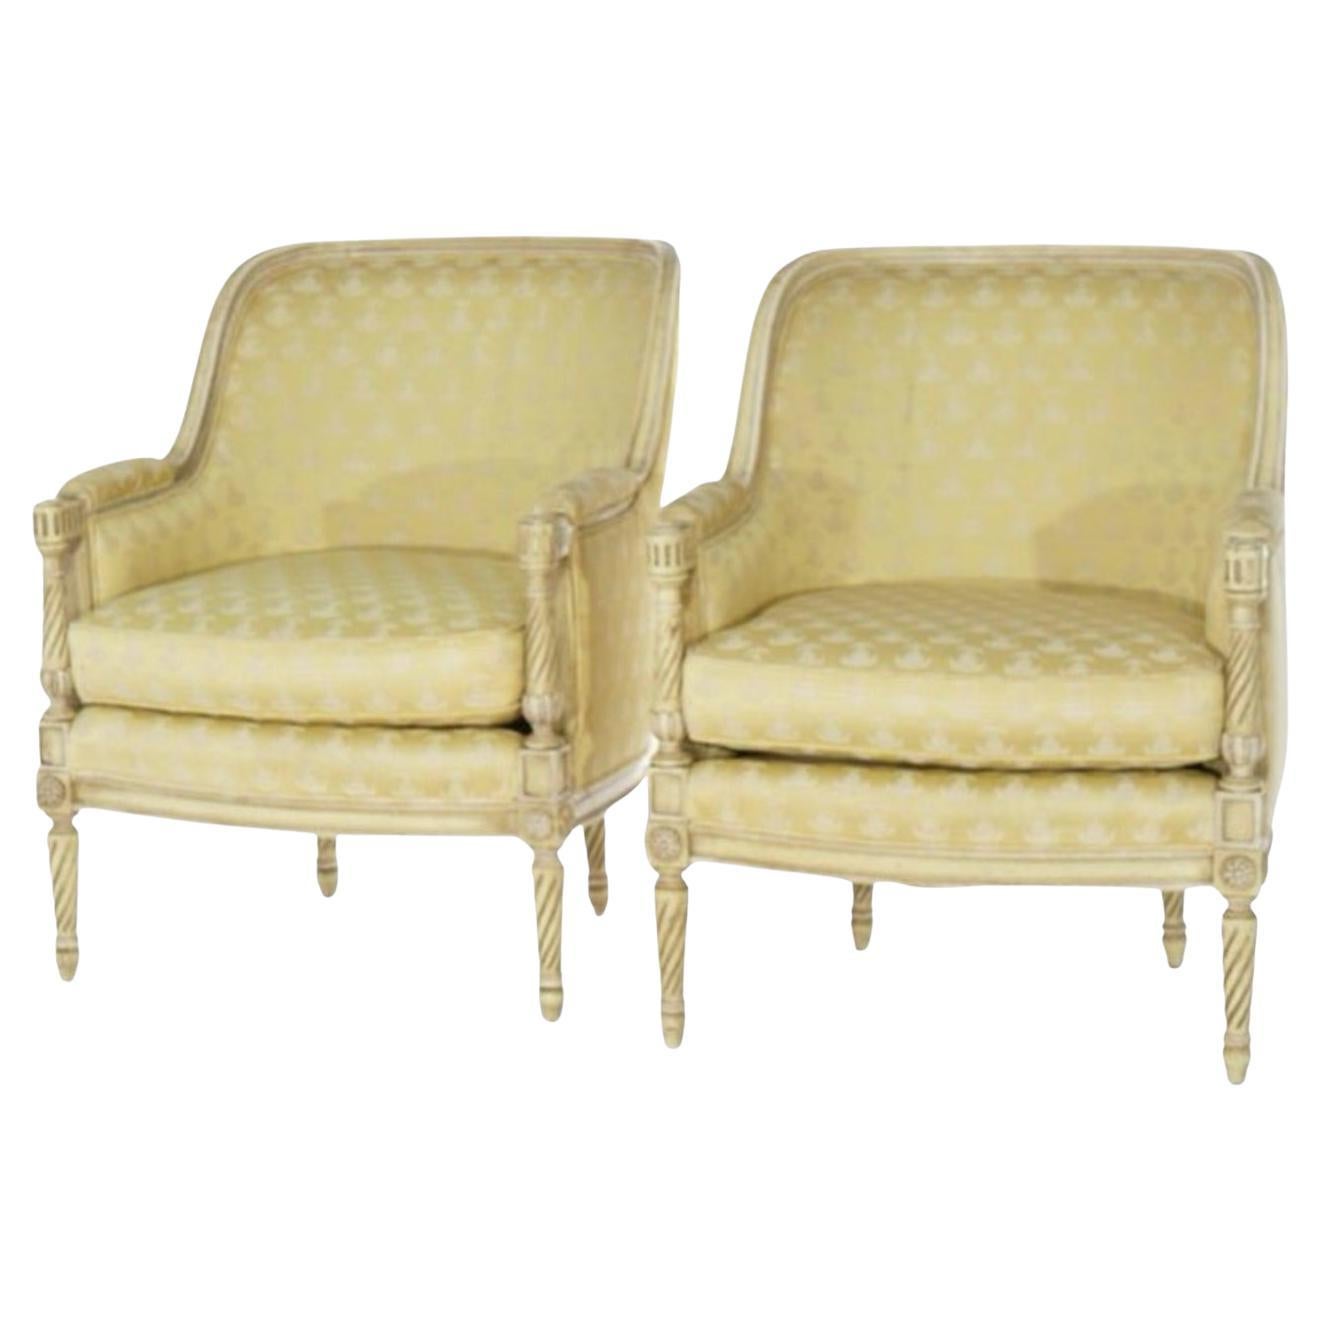 1950s French Louis XVI Style Carved And Painted Bergere Chairs - Pair For Sale